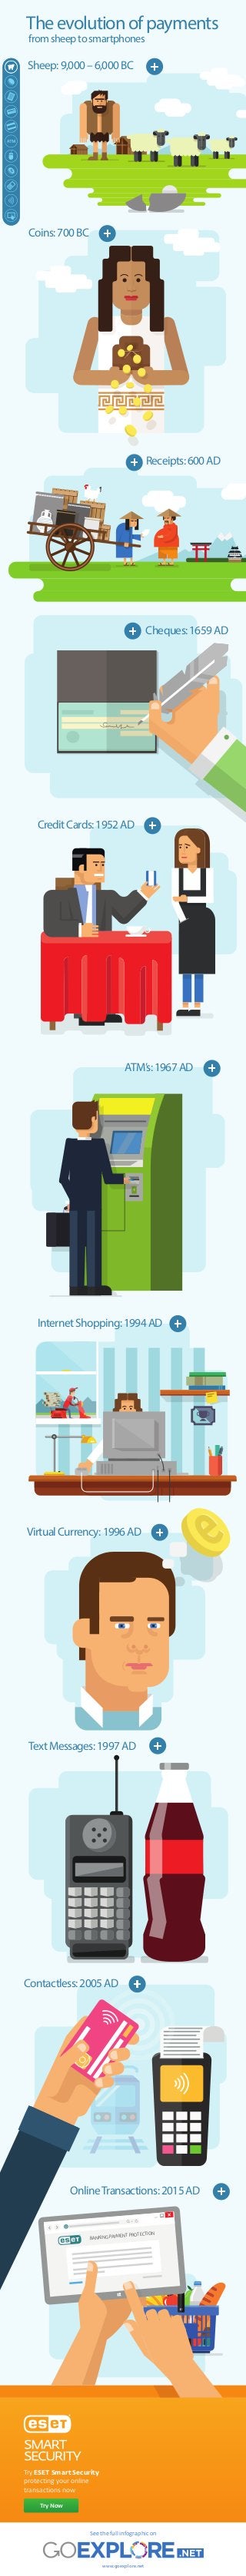 Theevolutionofpayments
fromsheeptosmartphones
Sheep:9,000–6,000BC
Coins:700BC
Receipts:600AD
Cheques:1659AD
CreditCards:1952AD
InternetShopping:1994AD
ATM’s:1967AD
VirtualCurrency:1996AD
TextMessages:1997AD
Contactless:2005AD
BANKING PAYMENT PROTECTION
OnlineTransactions:2015AD
www.goexplore.net
Try ESET Smart Security
protecting your online
transactions now
See the full infographic on
Try Now
 